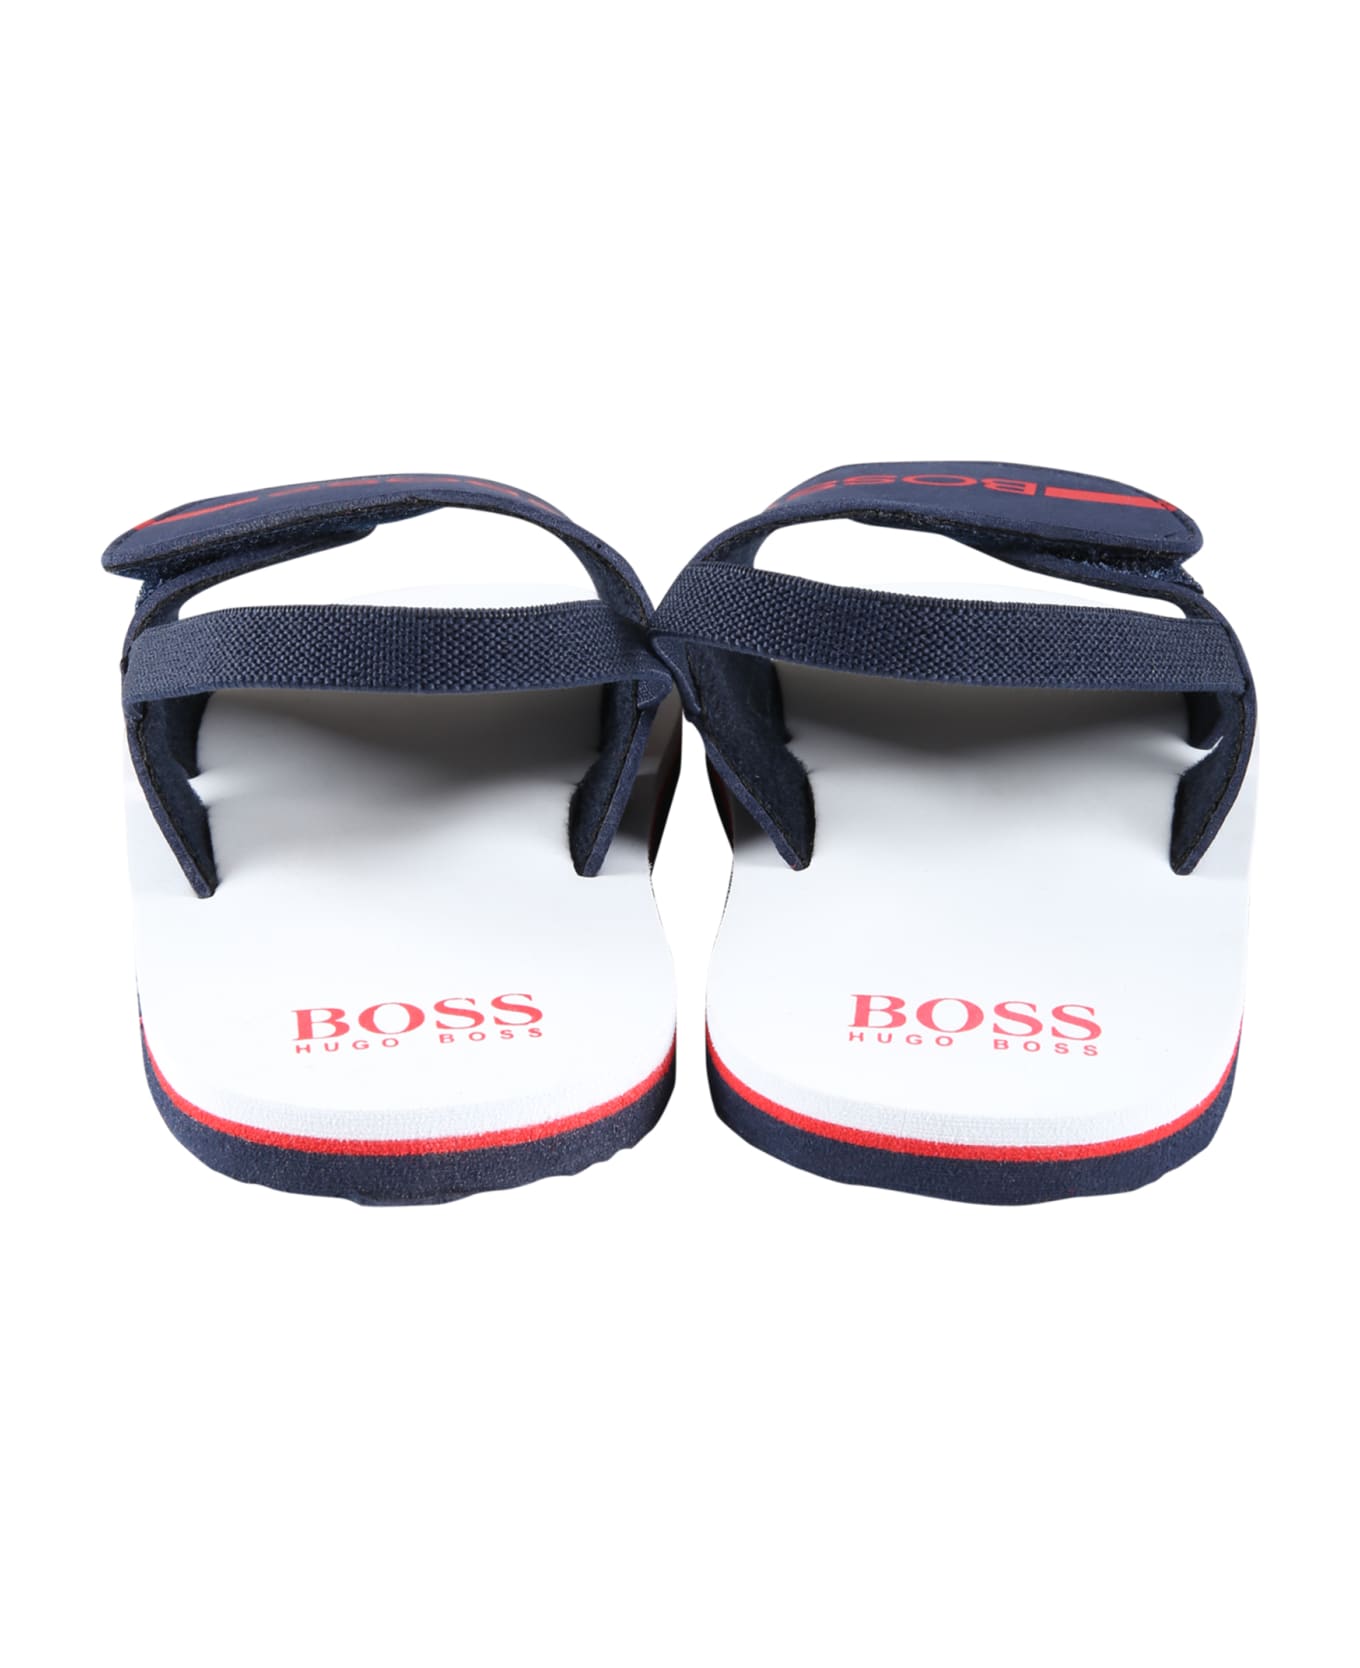 Hugo Boss Blue Sandals For Boy With Red Logo - Blue